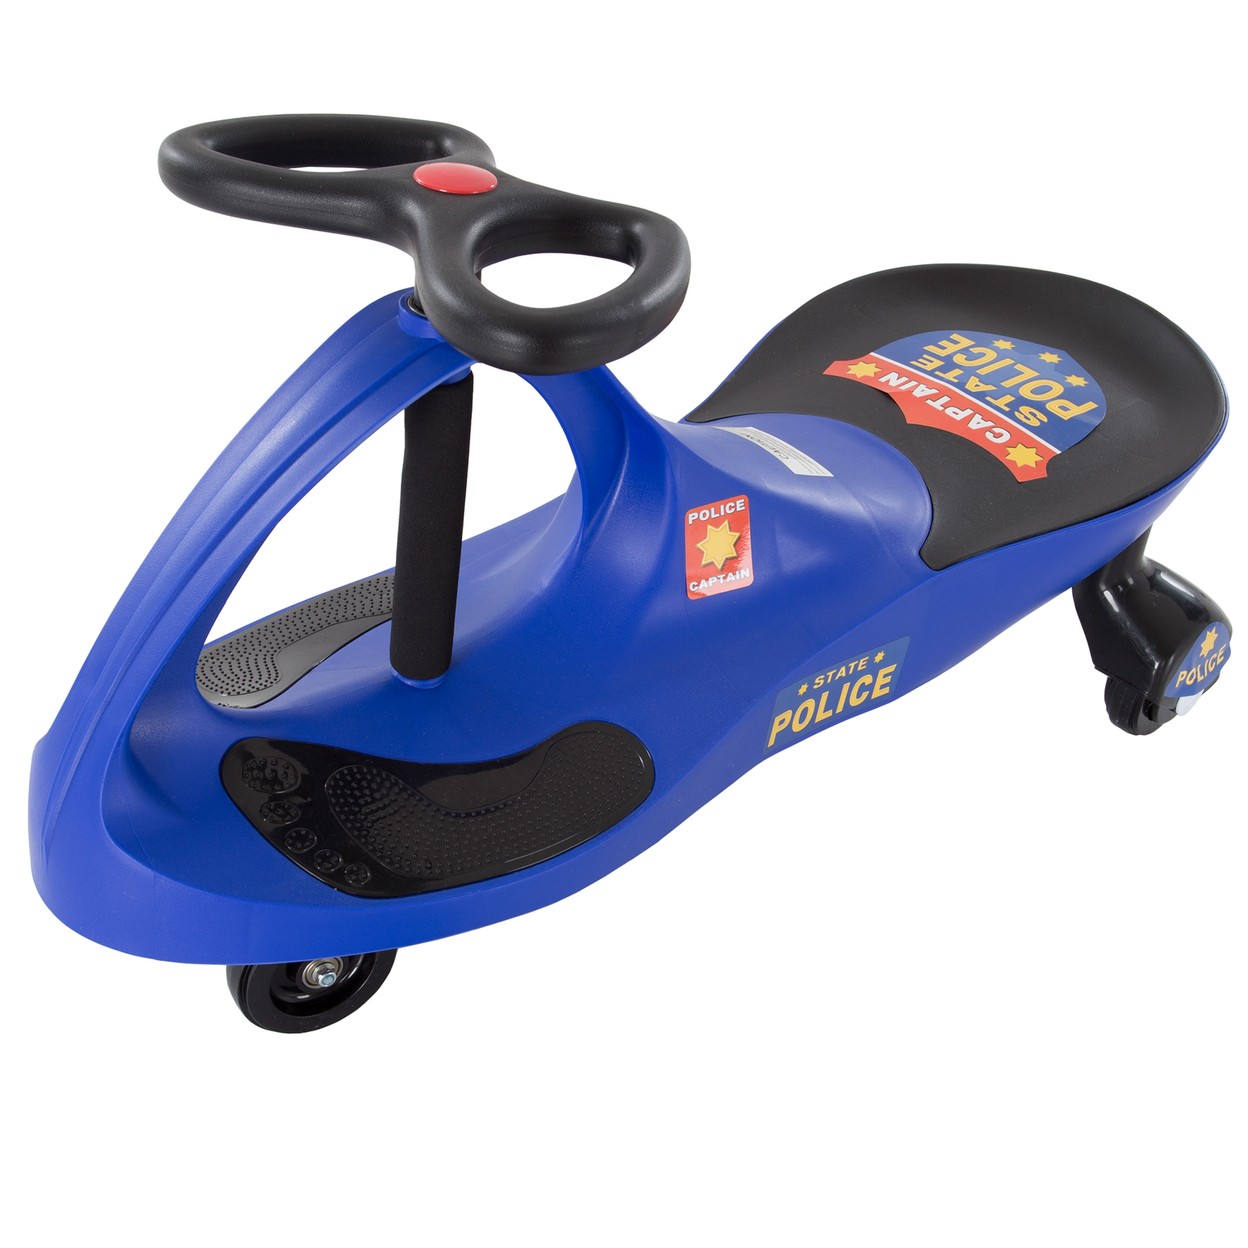 Police Wiggle Car Toy 3yrs And Up ZigZag Twist Wiggle Go No Batteries, Blue